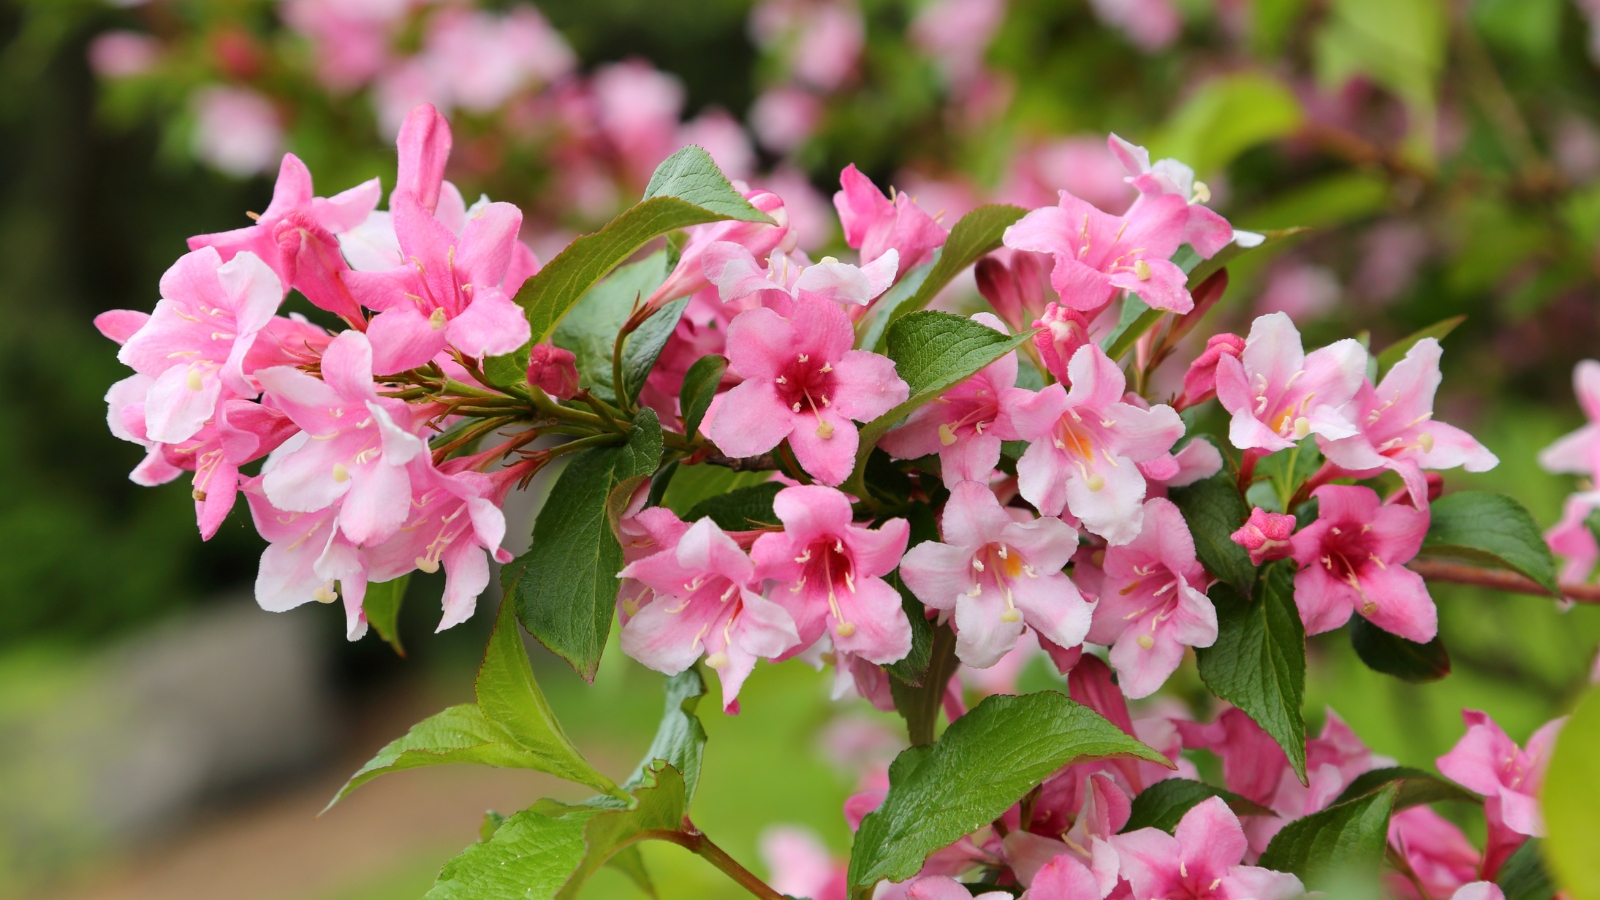 A branch of a ‘Czechmark Trilogy' weigela shrub boasts an array of pink flowers and leaves, standing out against a backdrop of blurred blossoms.